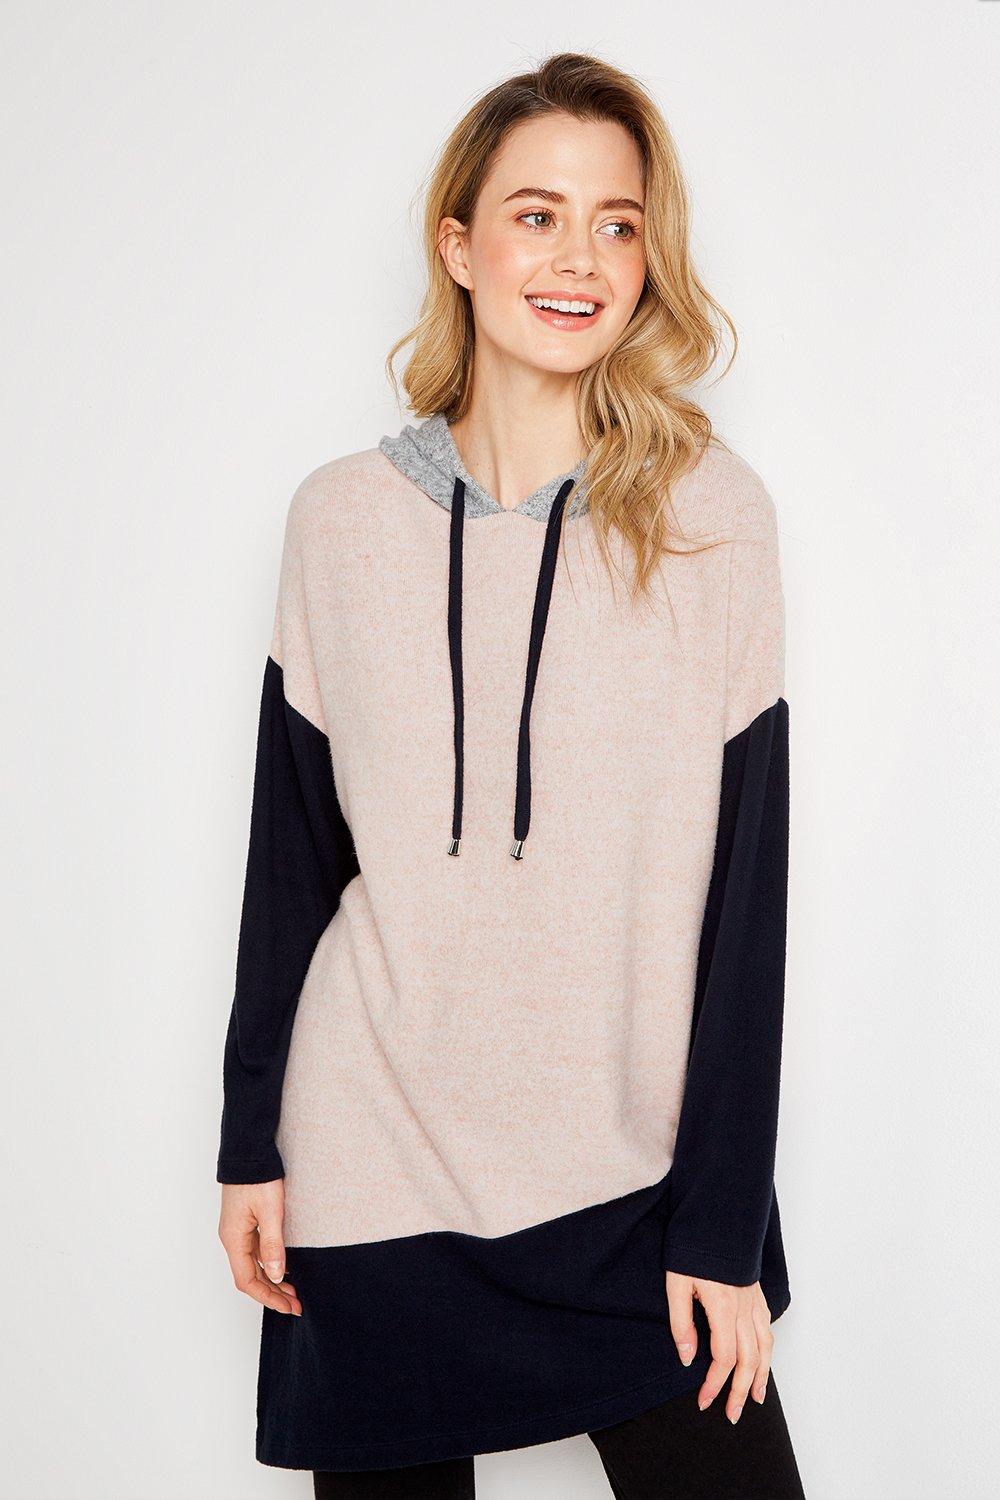 Loungewear Is A Must-Have This Season, And This Stylish Hoody Is The Perfect Piece To Add To Your Collection. A Pale Pink Hue, Colourblock Design And Asymmetric Hem Bring Instant Style, Whilst A Relaxed Fit And Longline Cut Mean This Cosy Jumper Is S